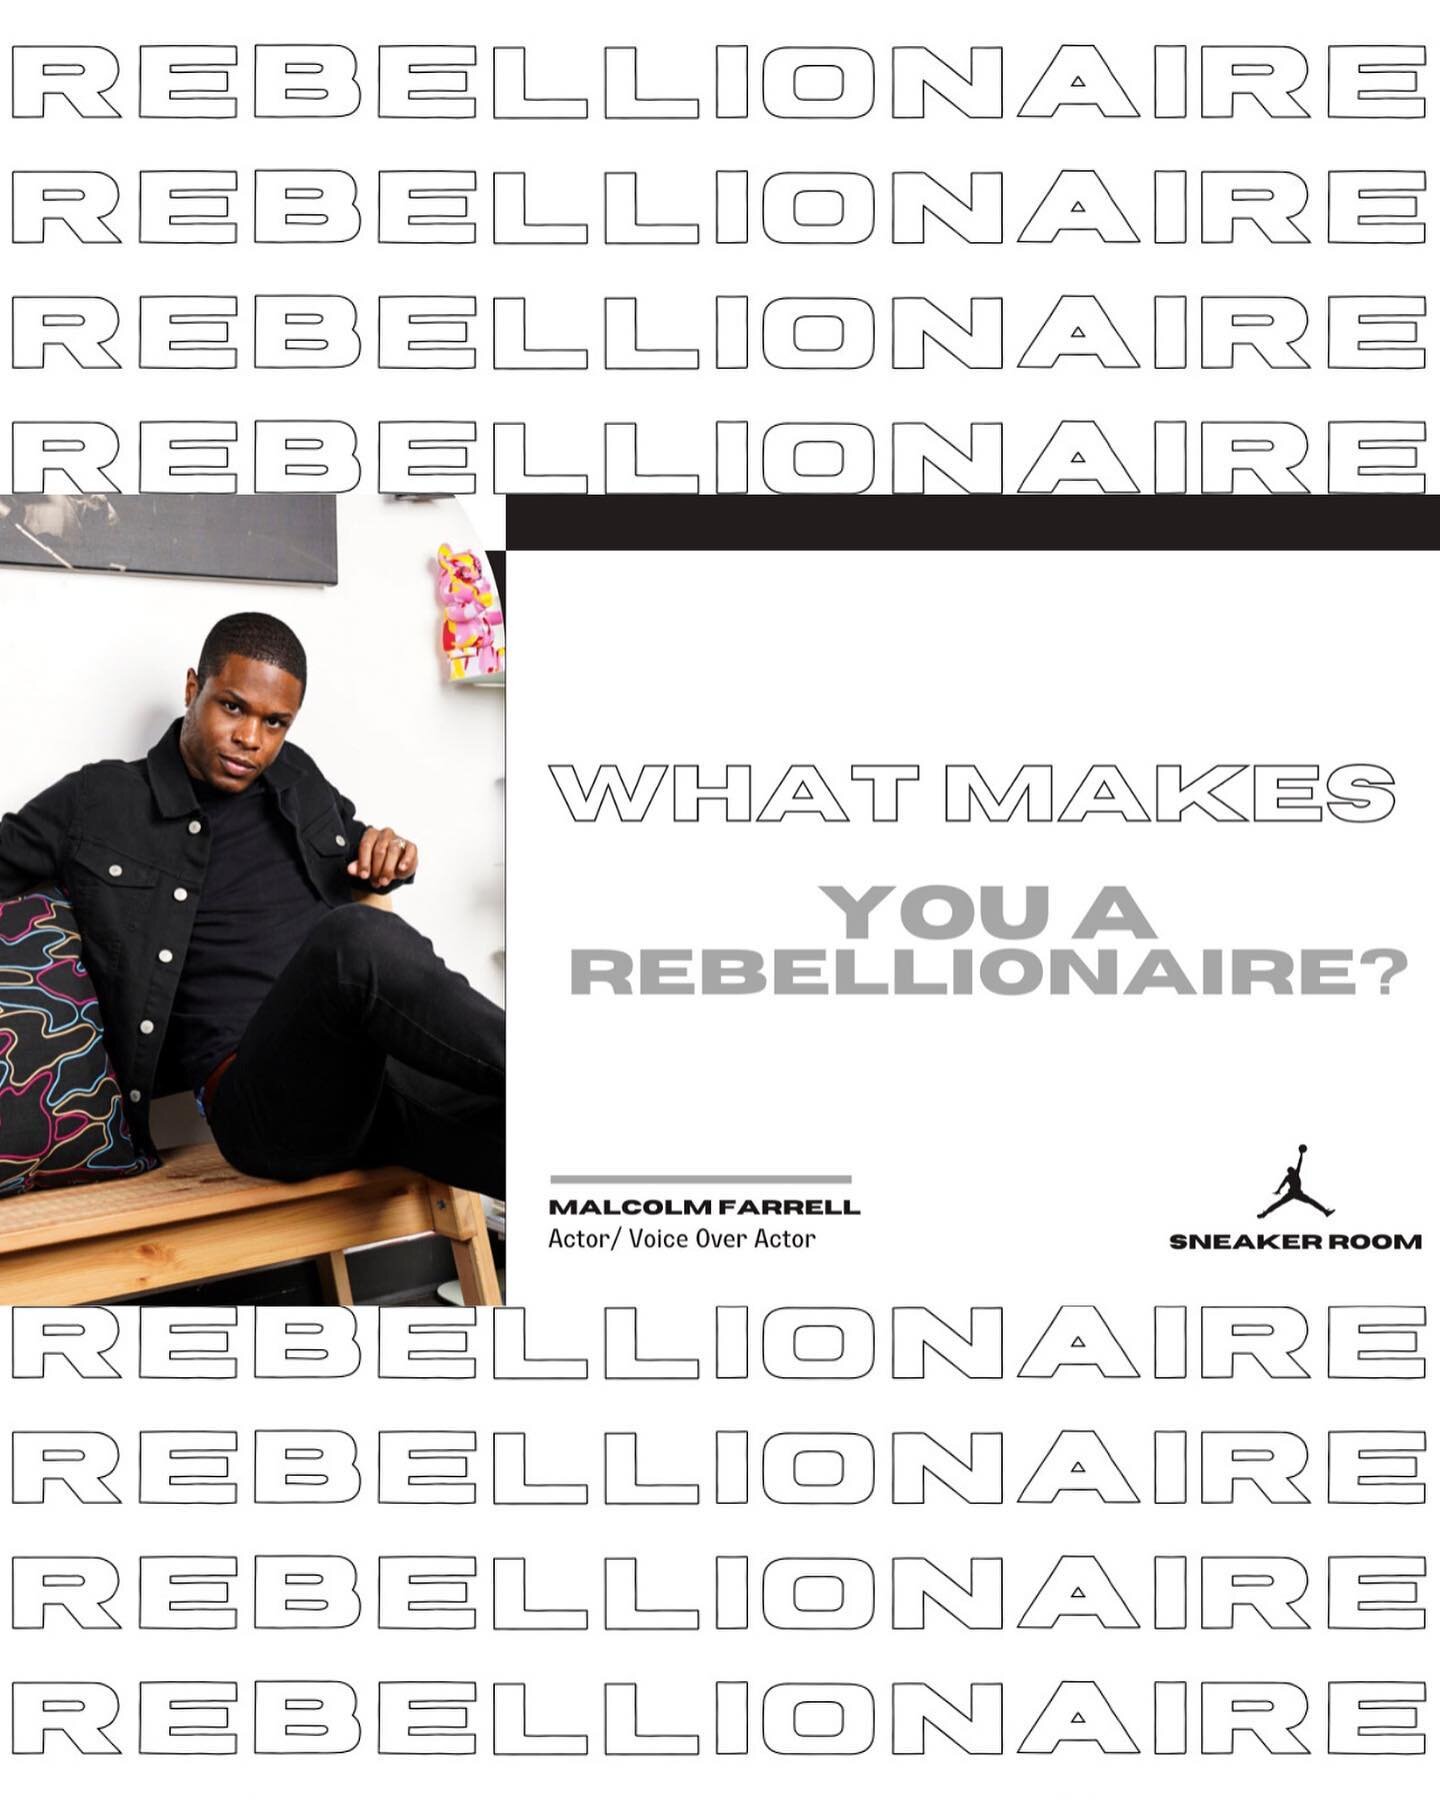 What makes me a Rebellionaire? I believe having the will to go after my dreams full force with no sign of looking back. Even when people told me no. ⁣⁣⁣⁣⁣⁣
⁣⁣⁣⁣⁣⁣
I want to say thank you to @sneakerroom for allowing me to be the voice of something so